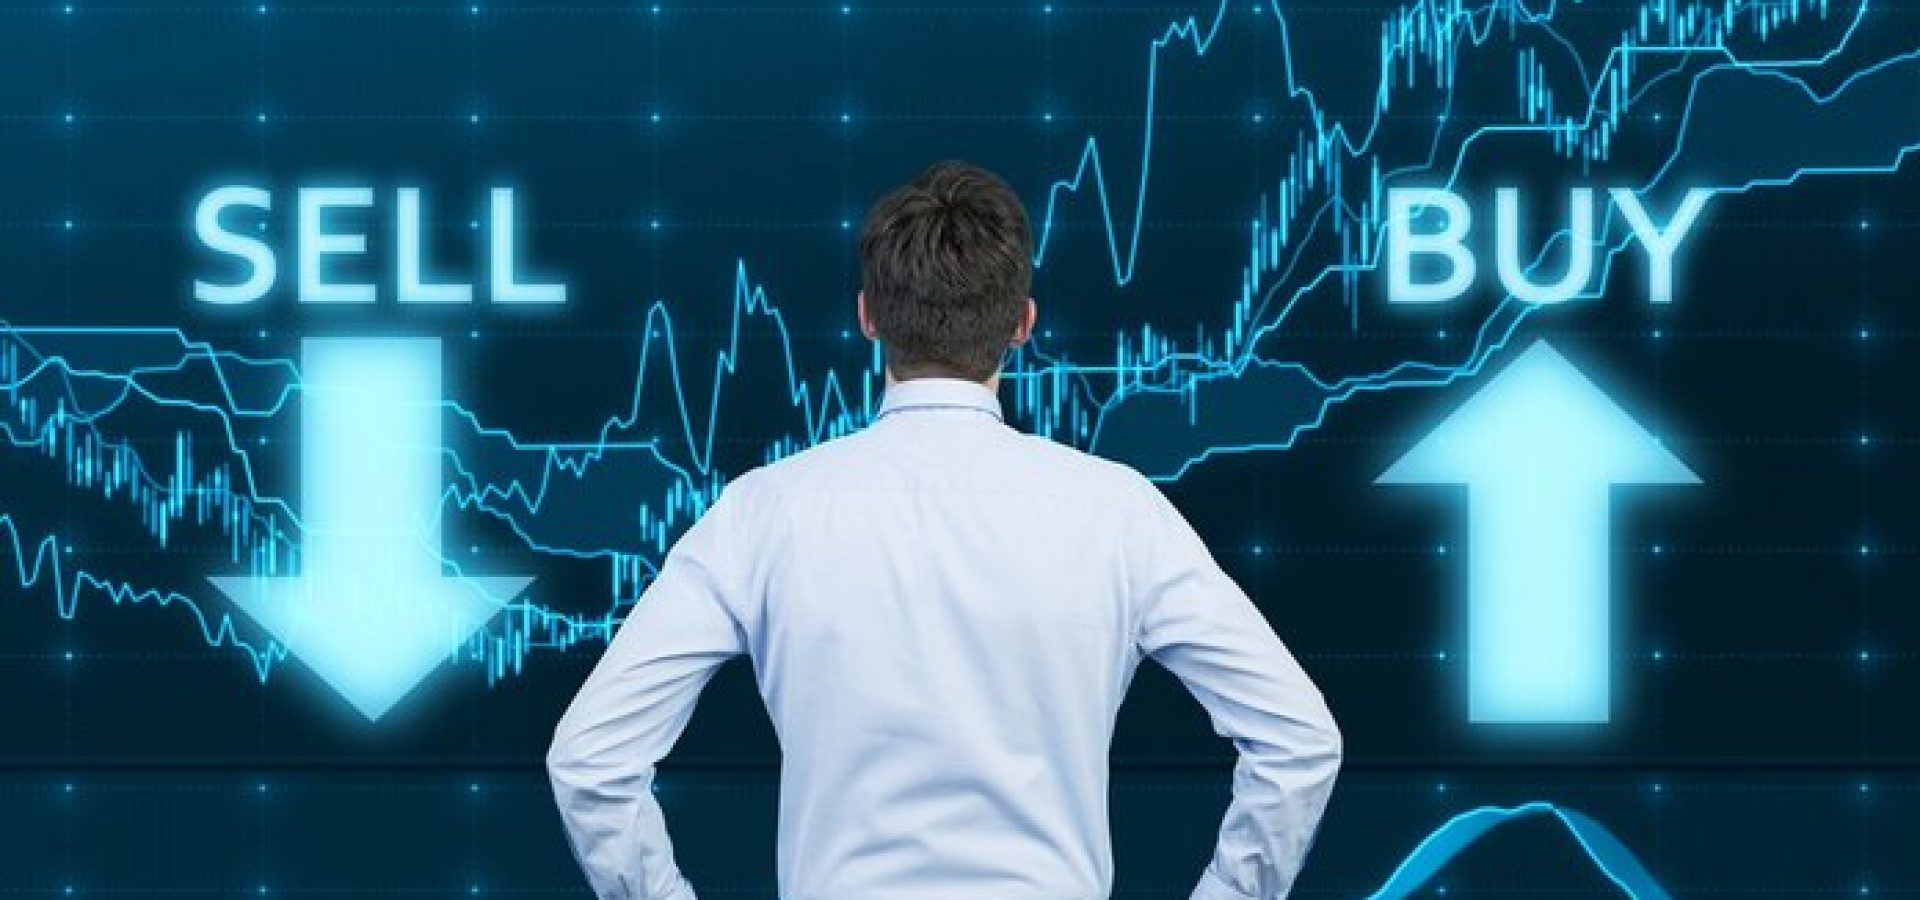 Stock Trader Decision: Buy or Sell?